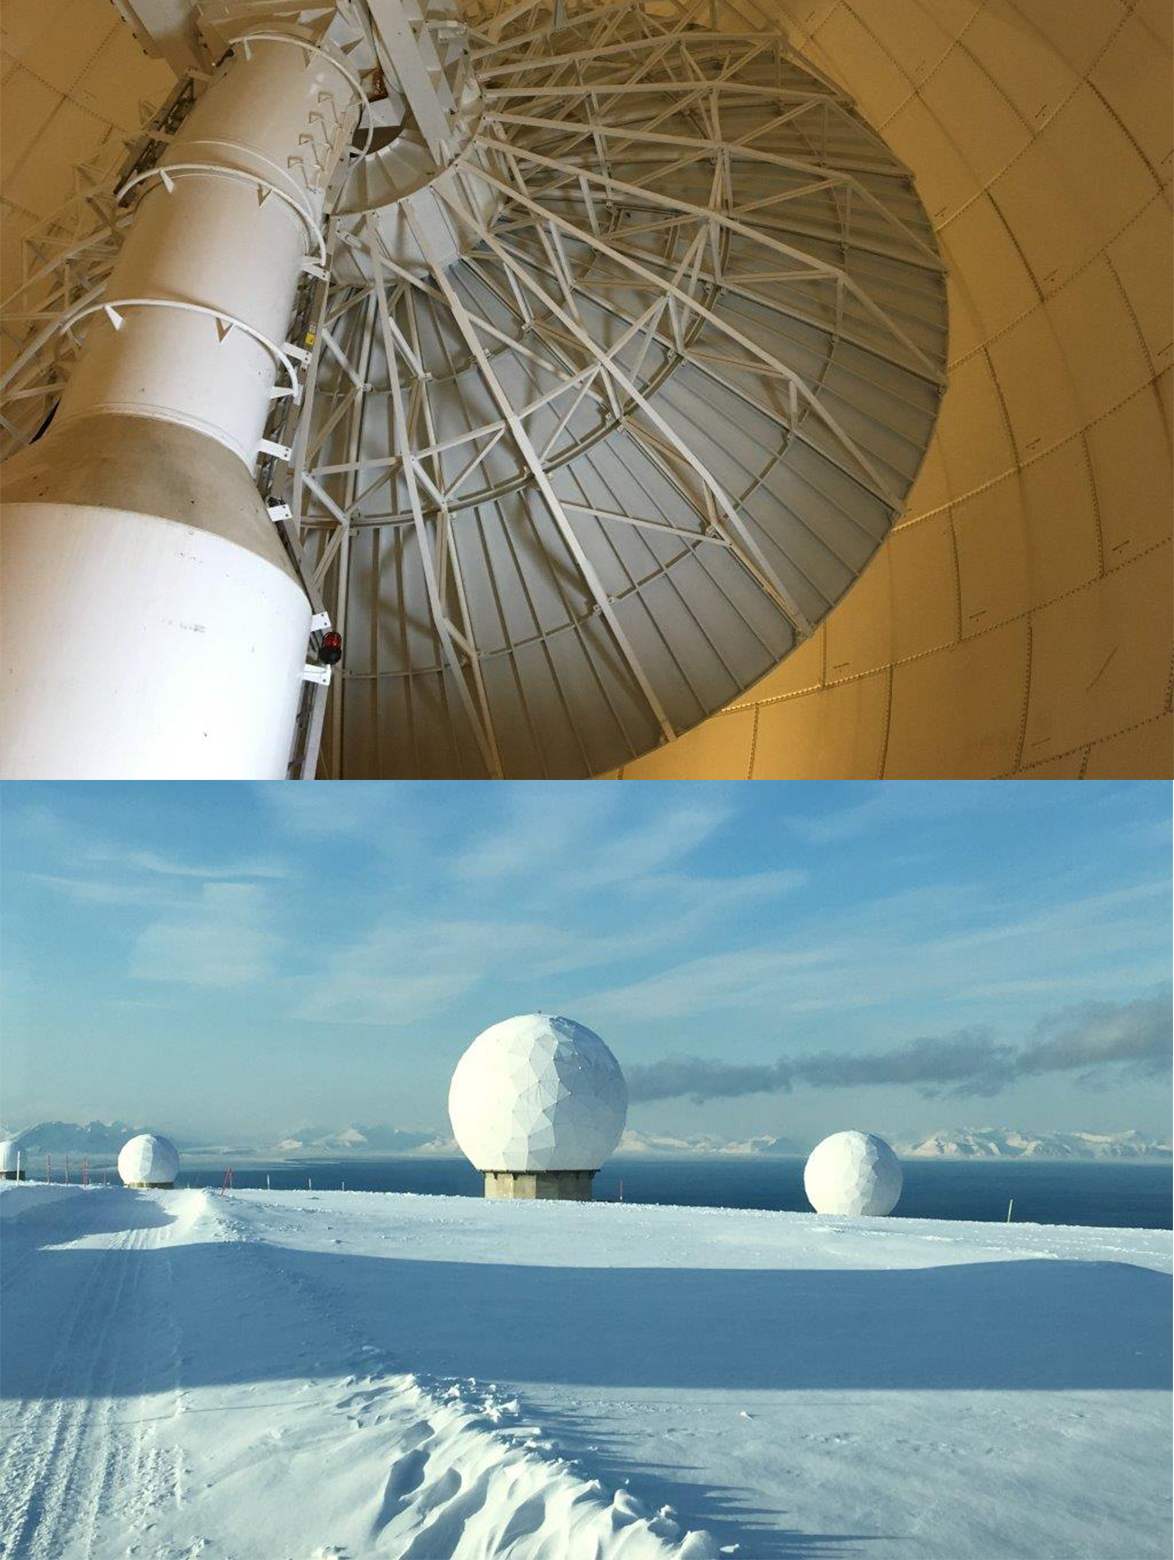 A composite image featuring several domes over antennas in Svalbard, Norway, against a snowy backdrop; and the inside of one of the domes showing the antenna dish.